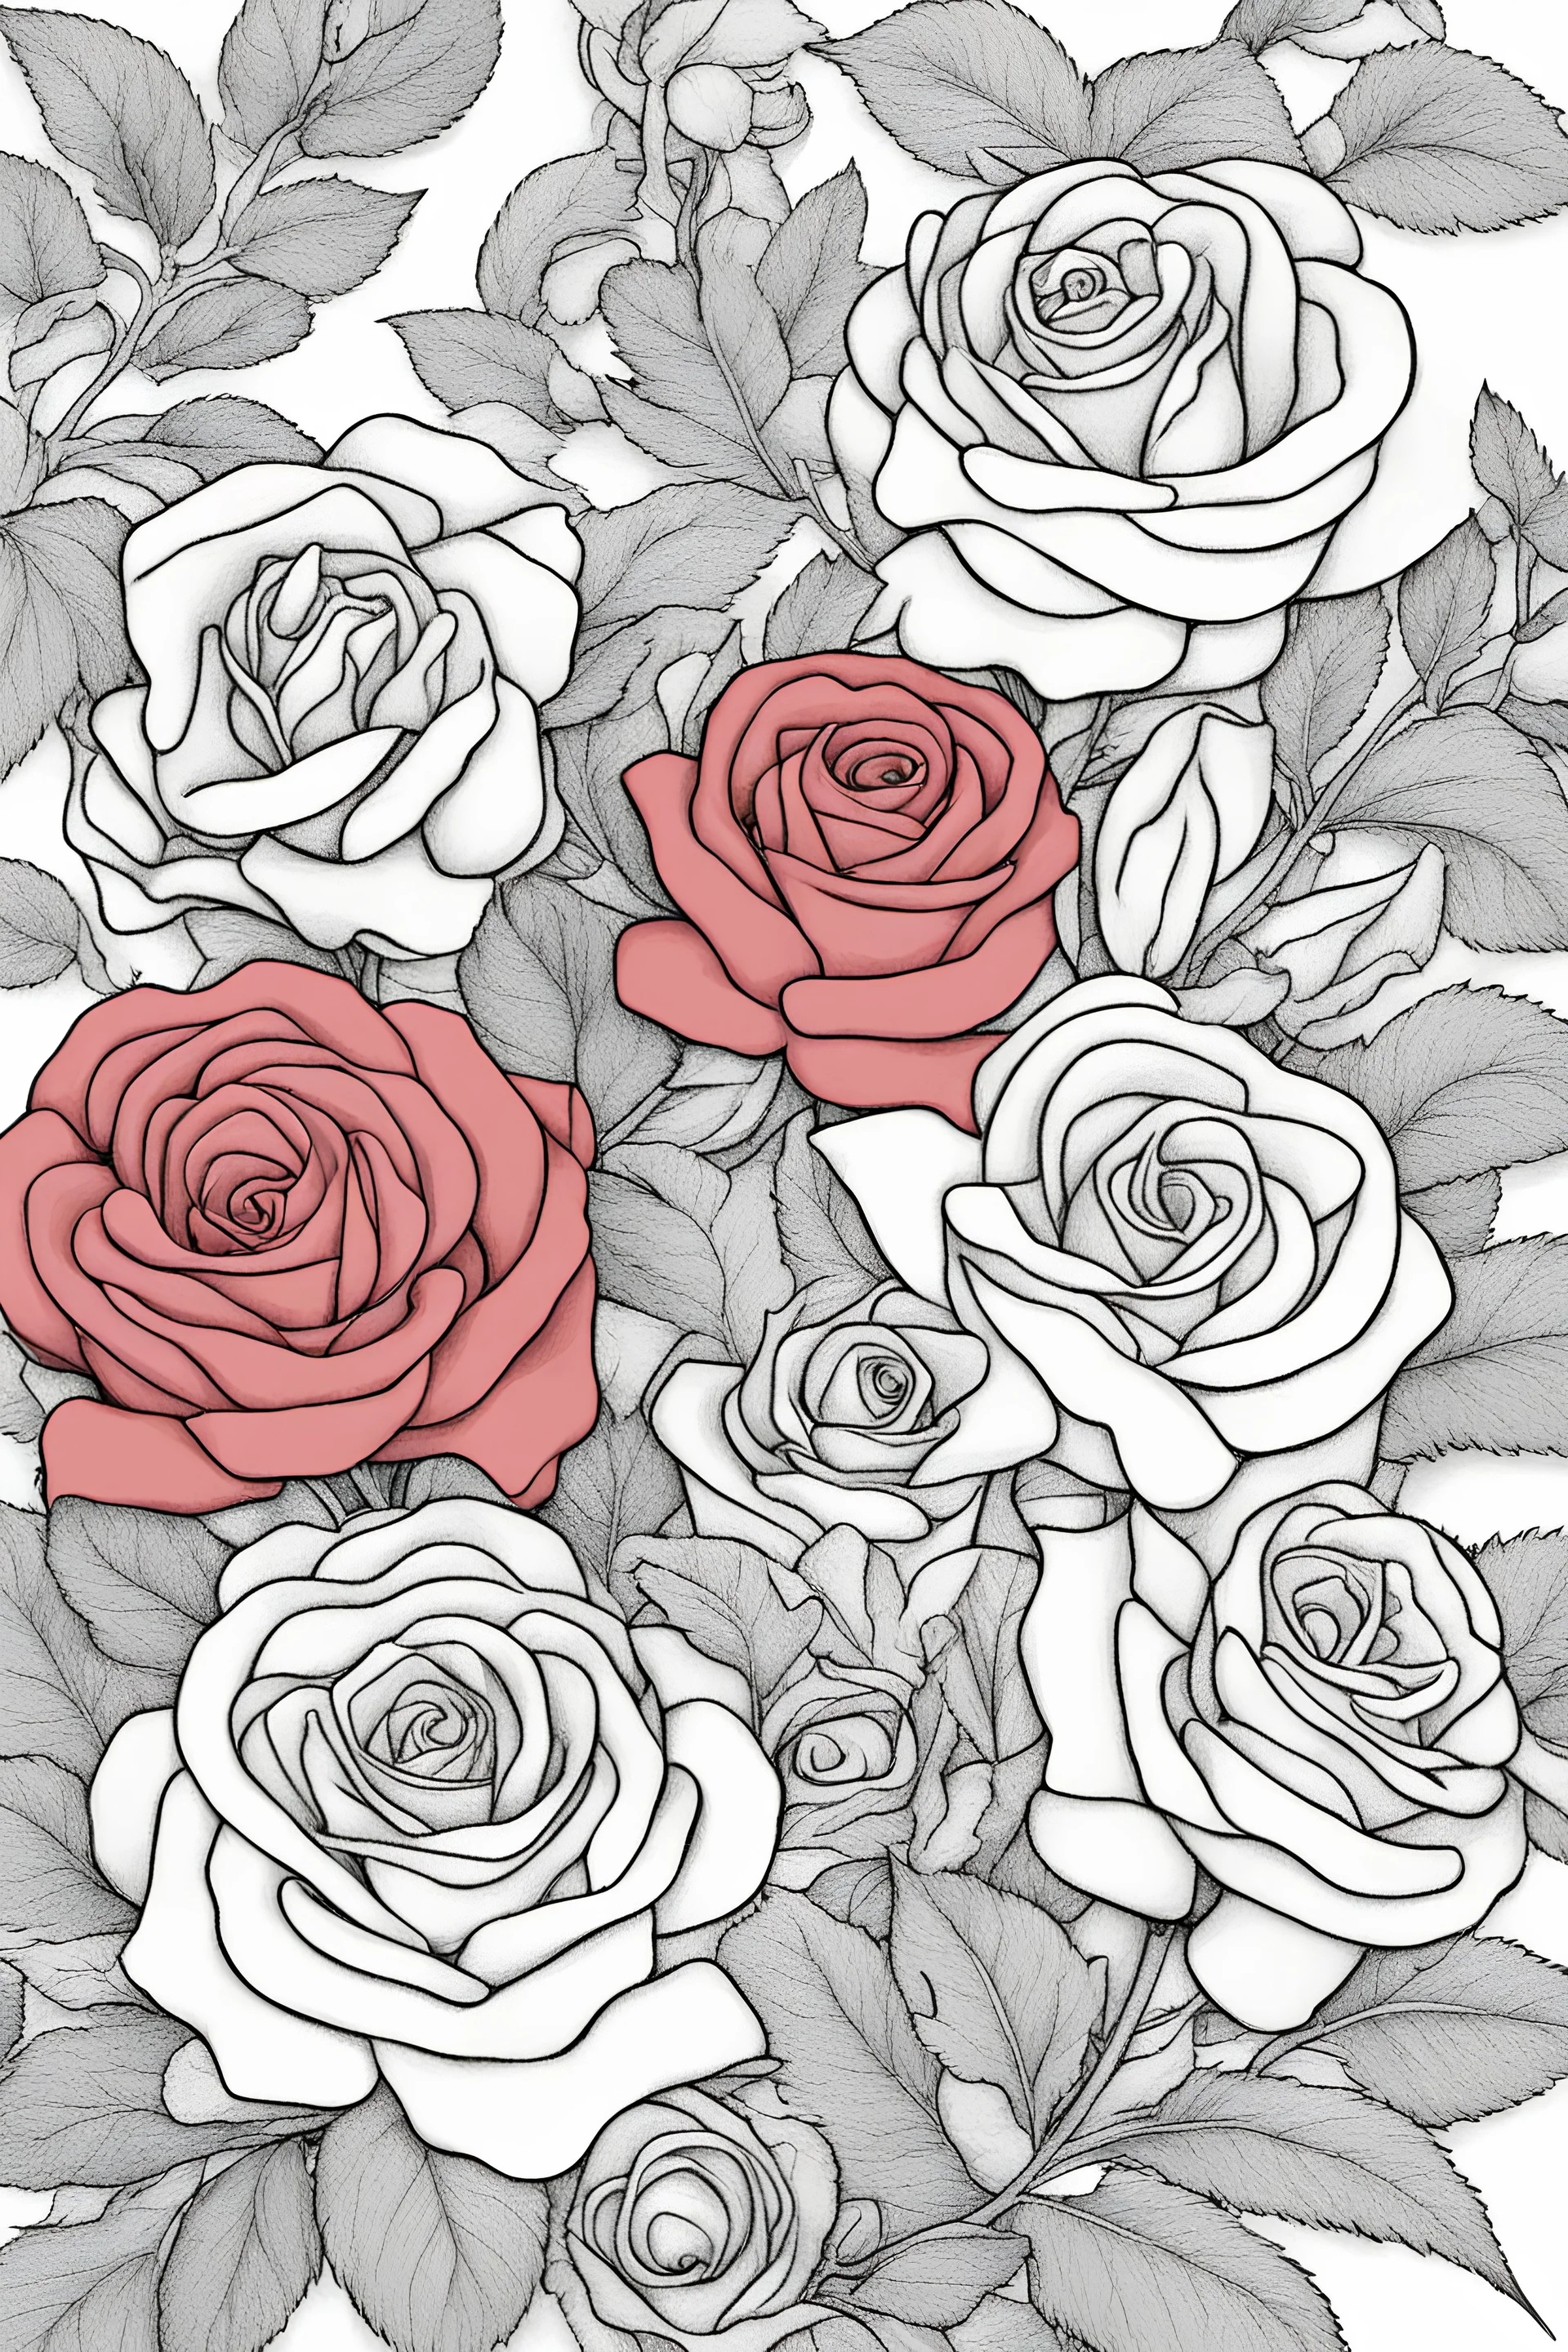 create a coloring page showing flowers of rose